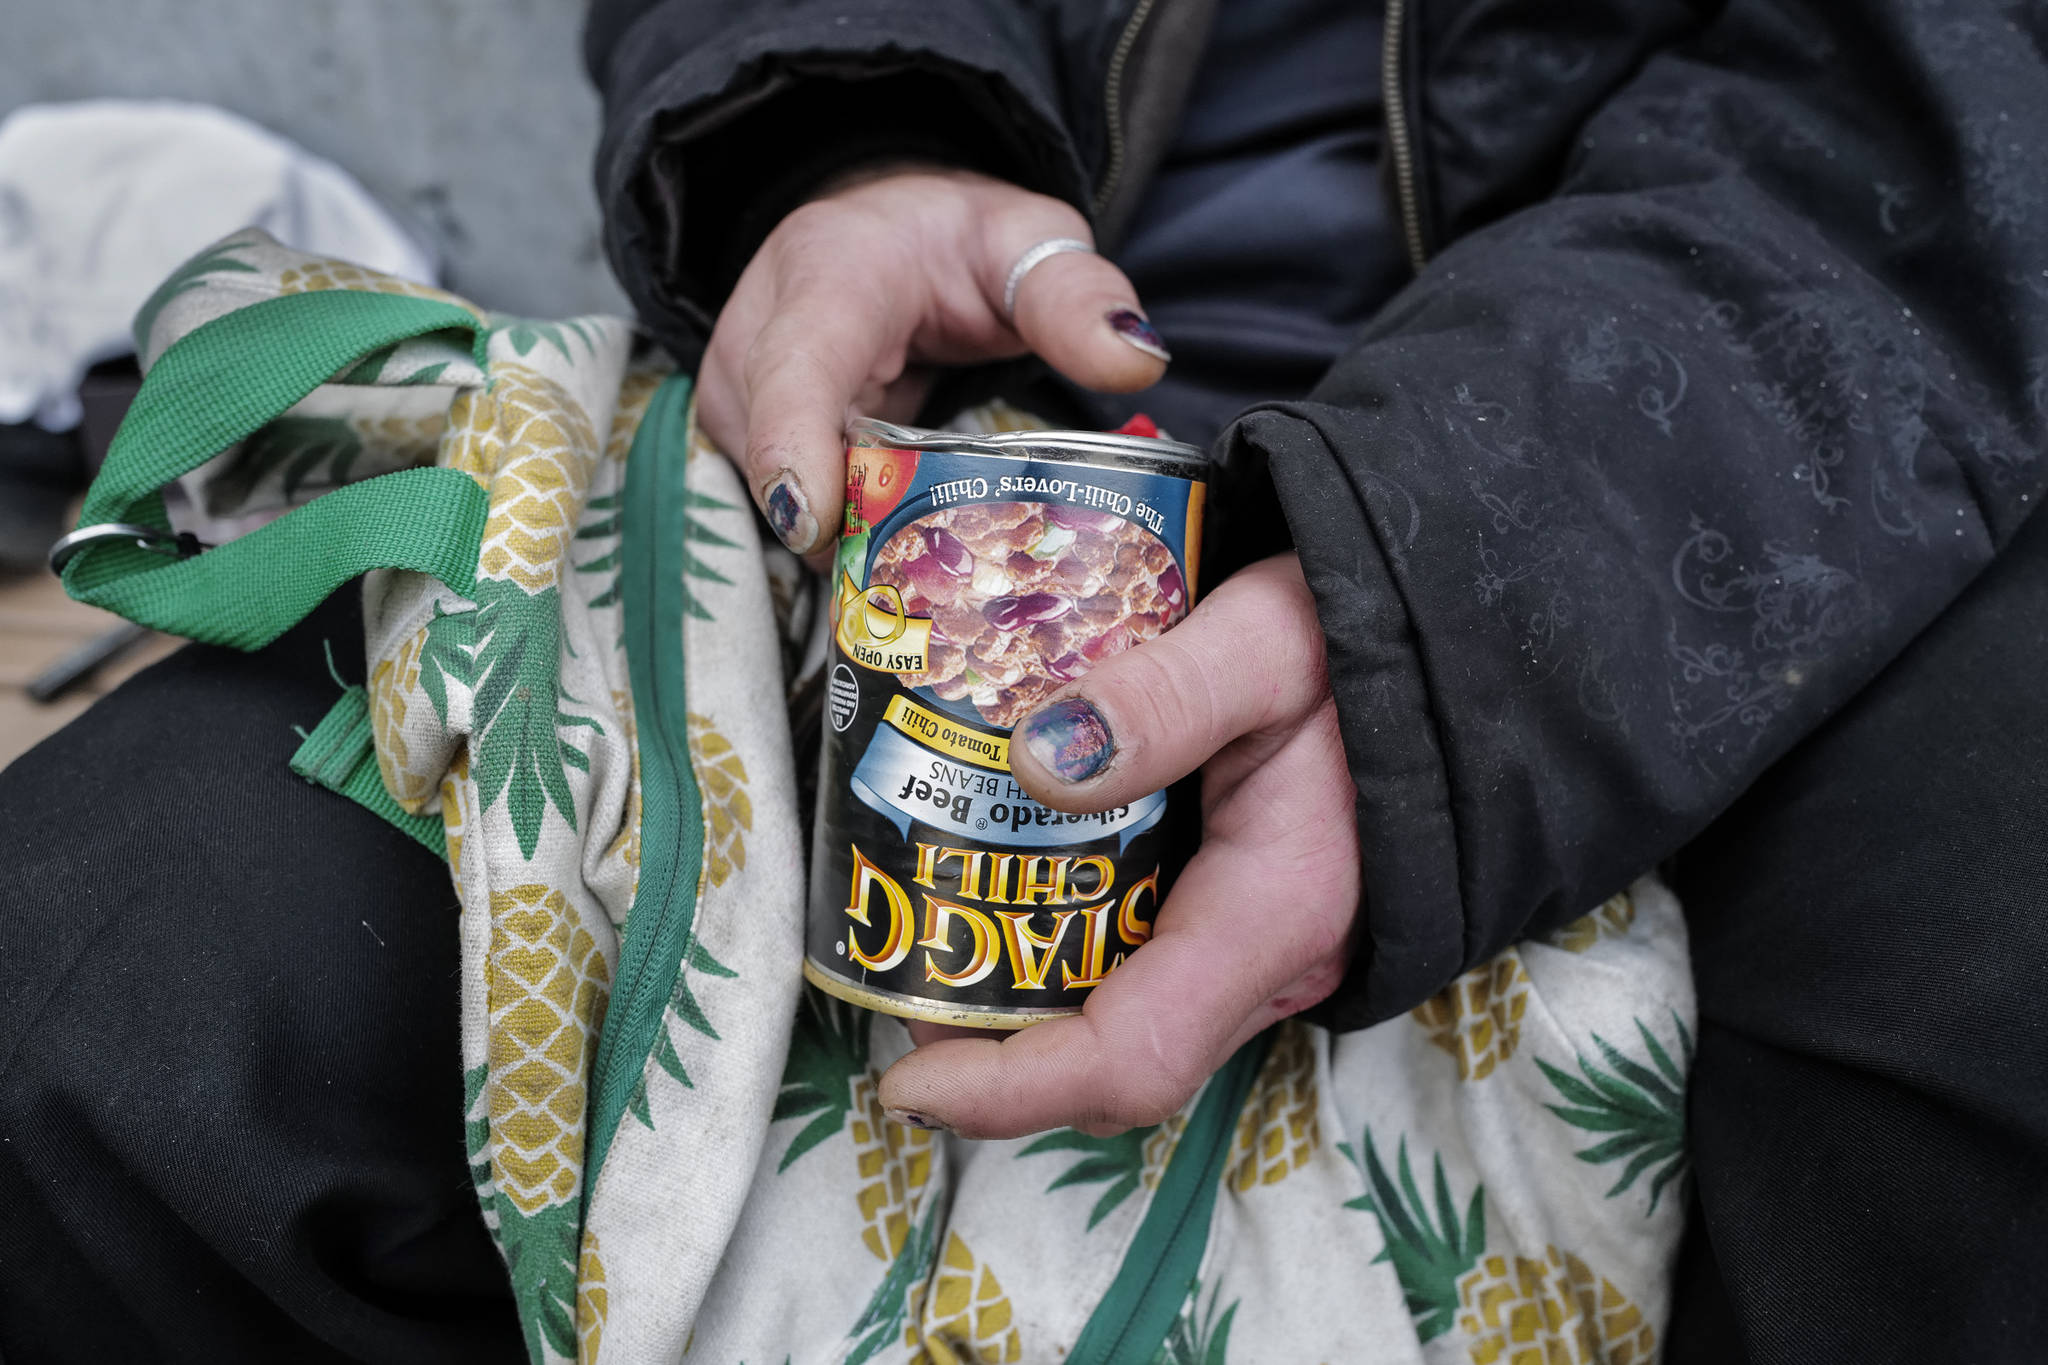 Justin Fairclough, who said he has stayed on and off at the Glory Hall over the last four years, holds a can of chili in front of the Juneau Downtown Library on Tuesday, Aug. 13, 2019. Fairclough said he had no way of heating the food for lunch. (Michael Penn | Juneau Empire)